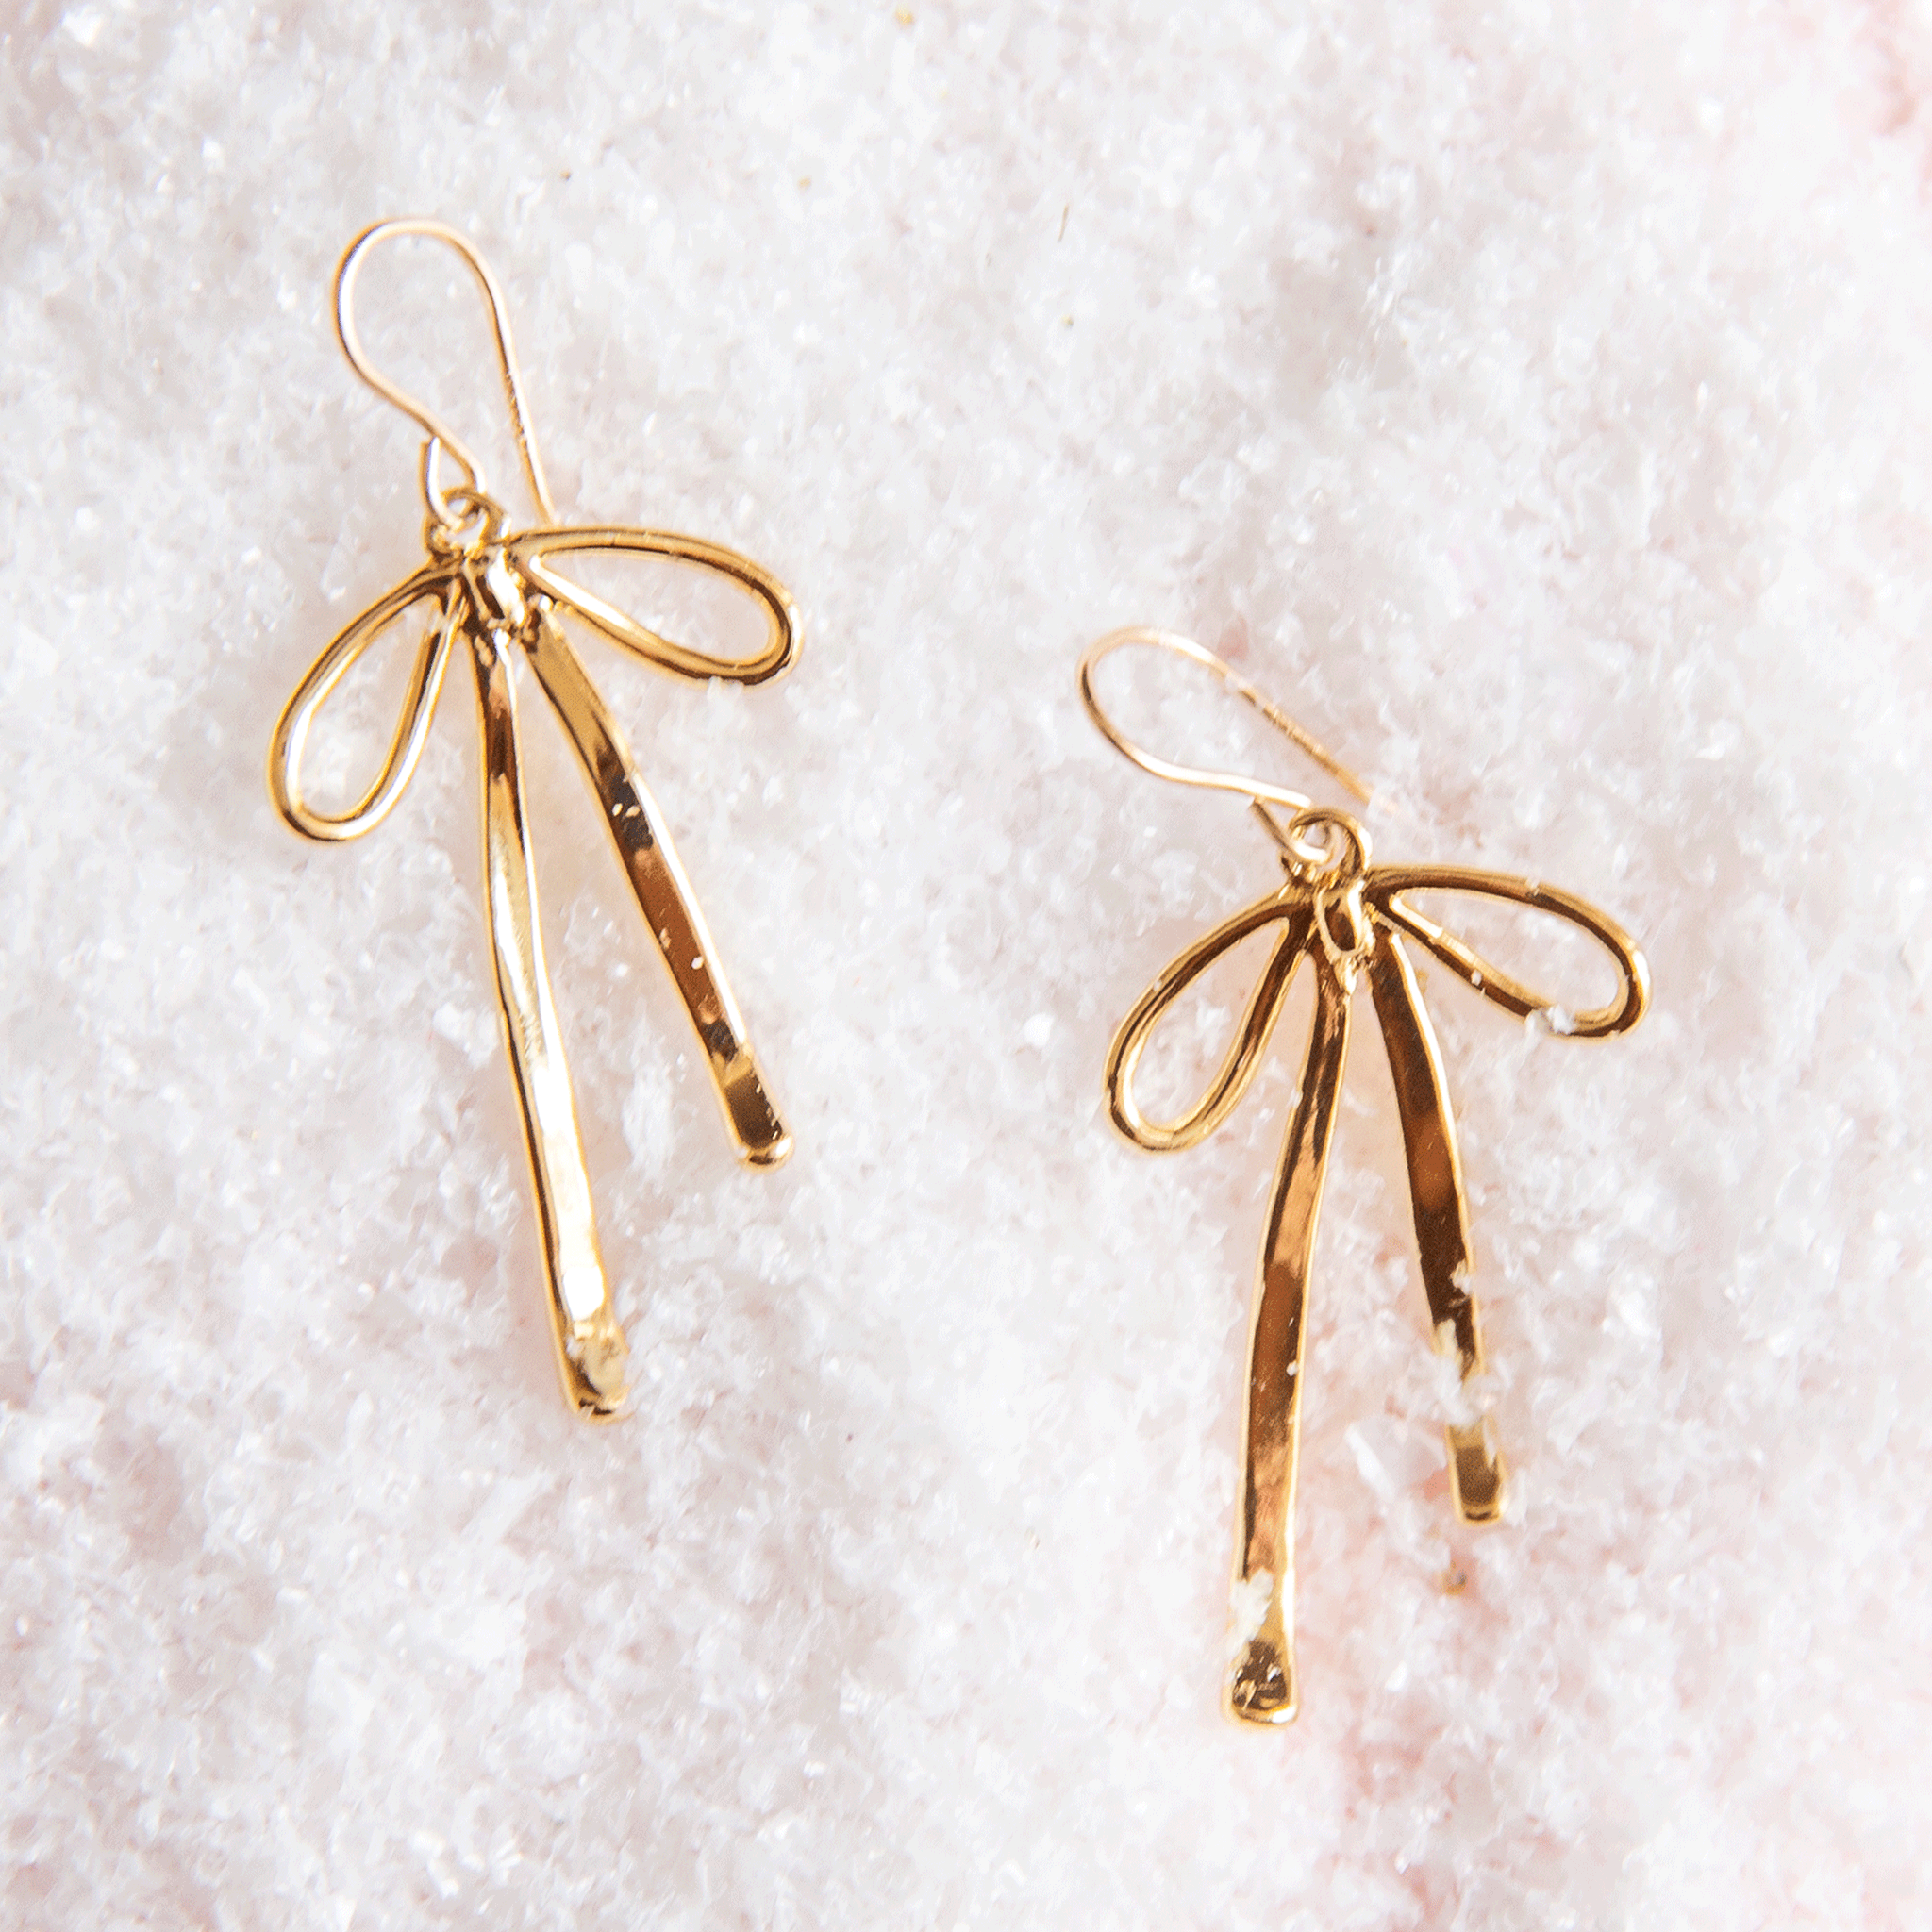 On a pink snowy background is a pair of gold bow shaped earrings.